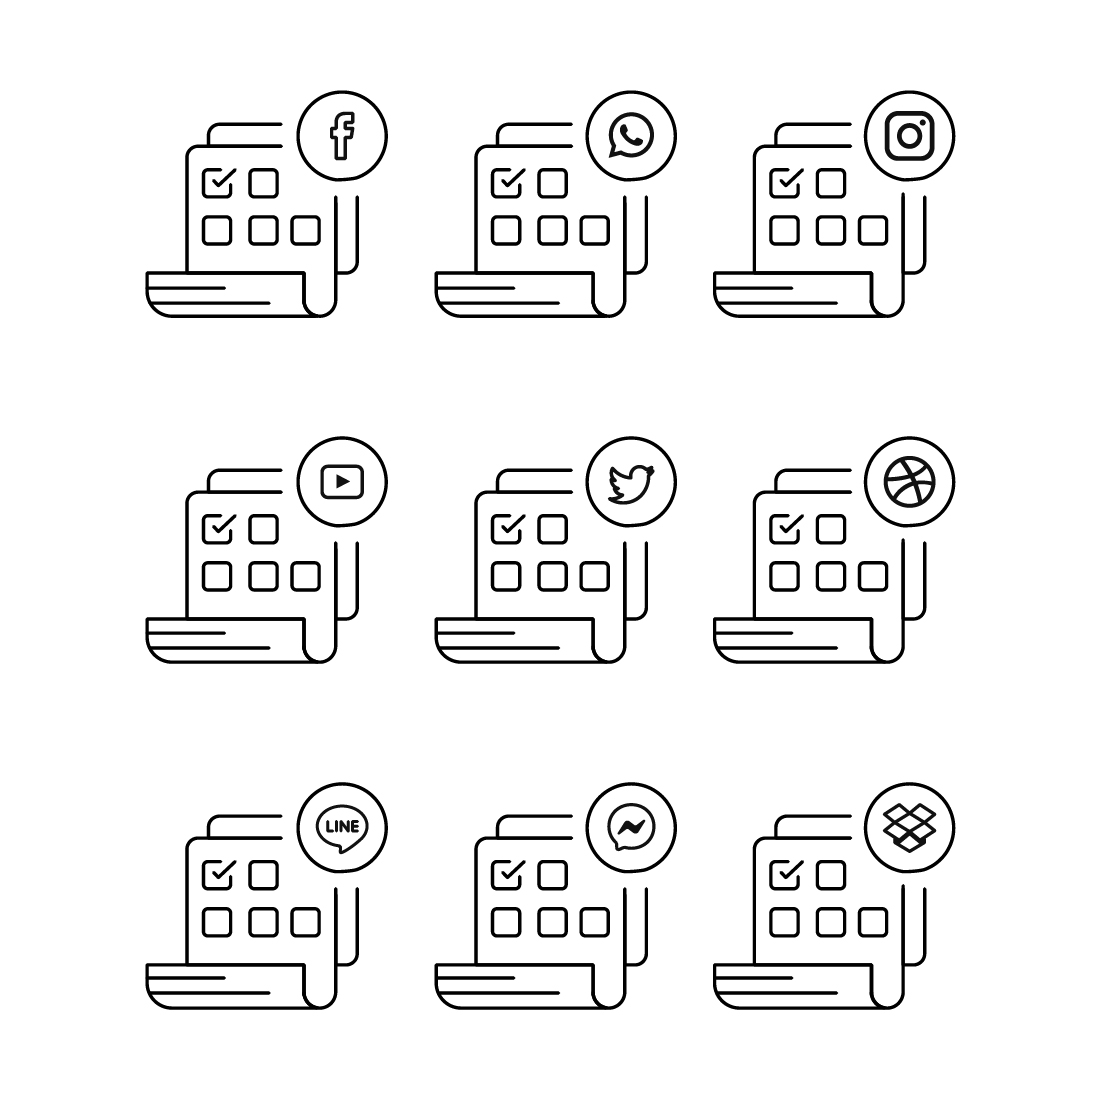 Set of icons depicting different types of devices.